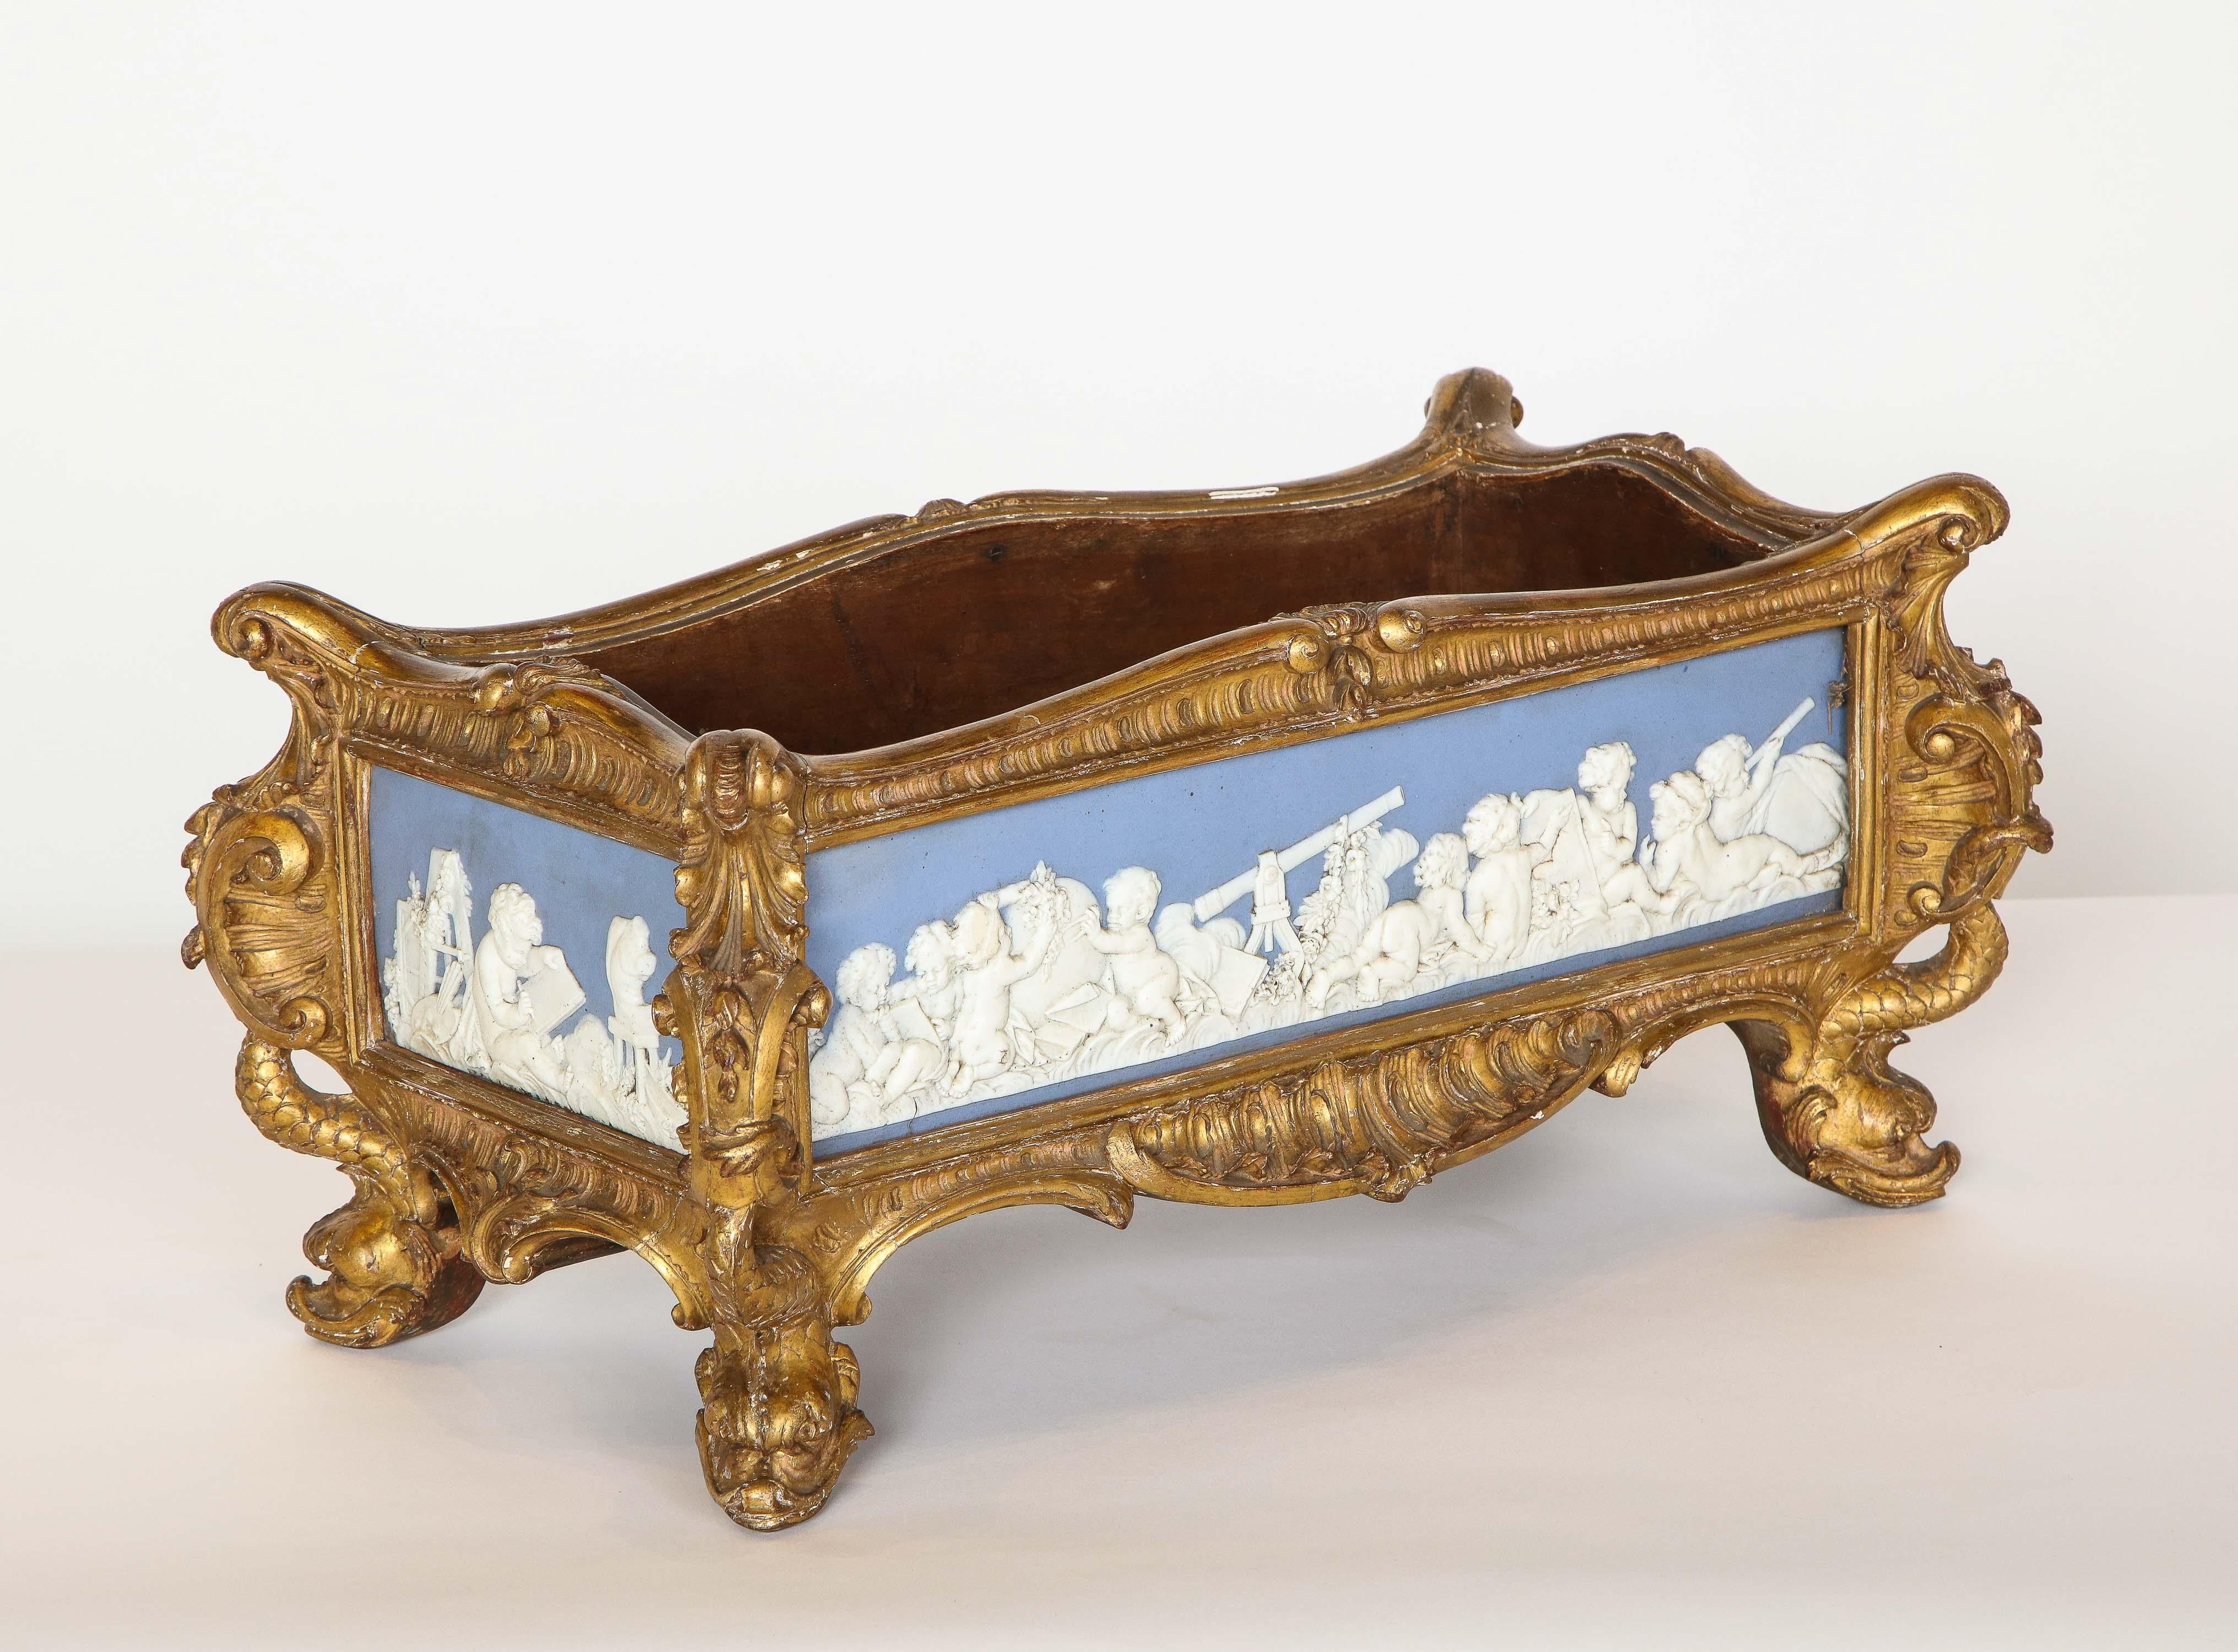 A Napoleon III Giltwood and Jasperware Wedgewood Centerpiece Jardinière, circa 1870.

Very fine quality, with craved dragon feet, and rococo scrolls throughout. Mounted with four extremely fine quality Wedgewood / jasperware plaques of